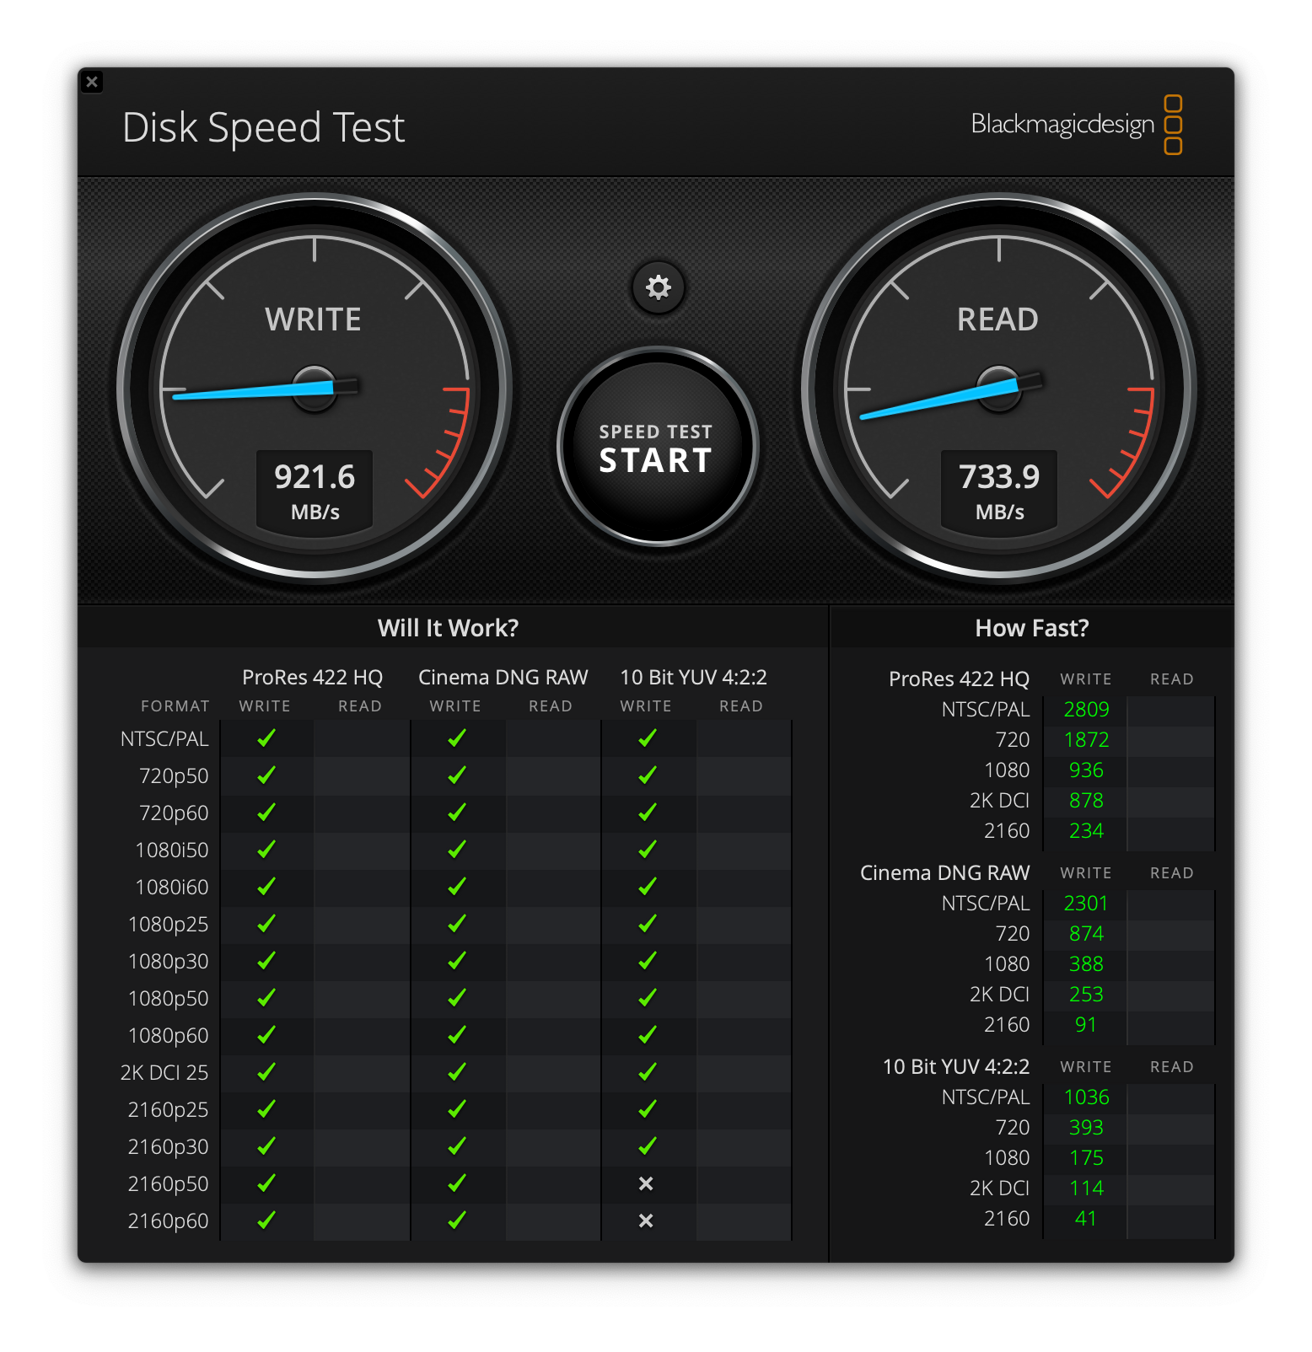 Speed test results when formatted APFS